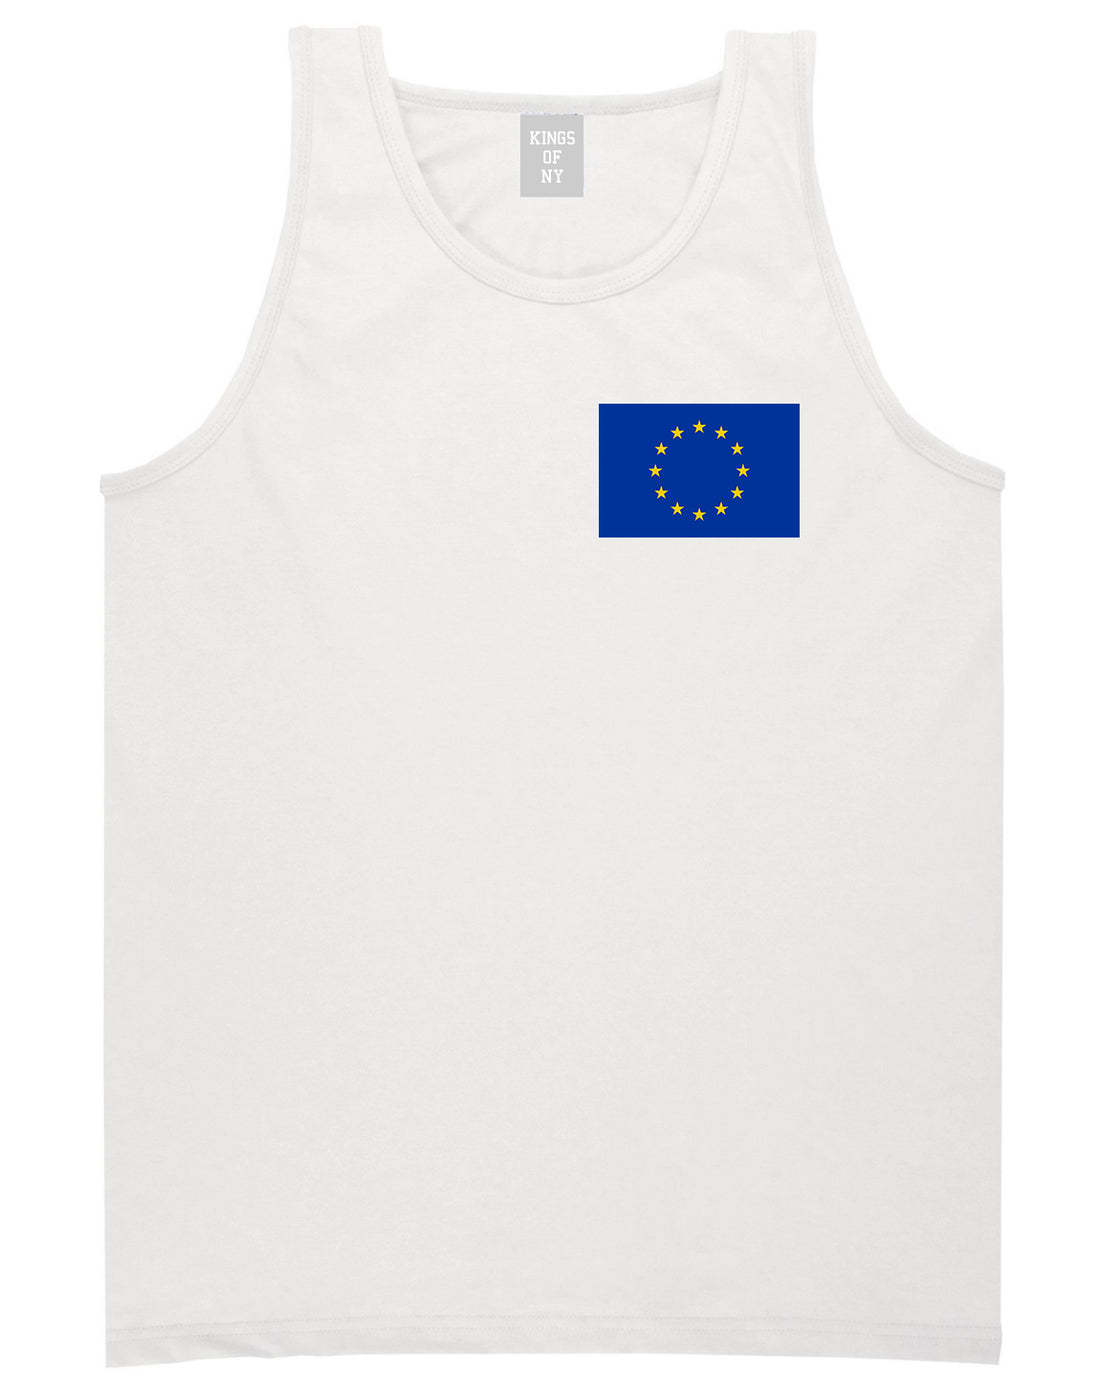 European Union Flag Chest Mens White Tank Top Shirt by KINGS OF NY